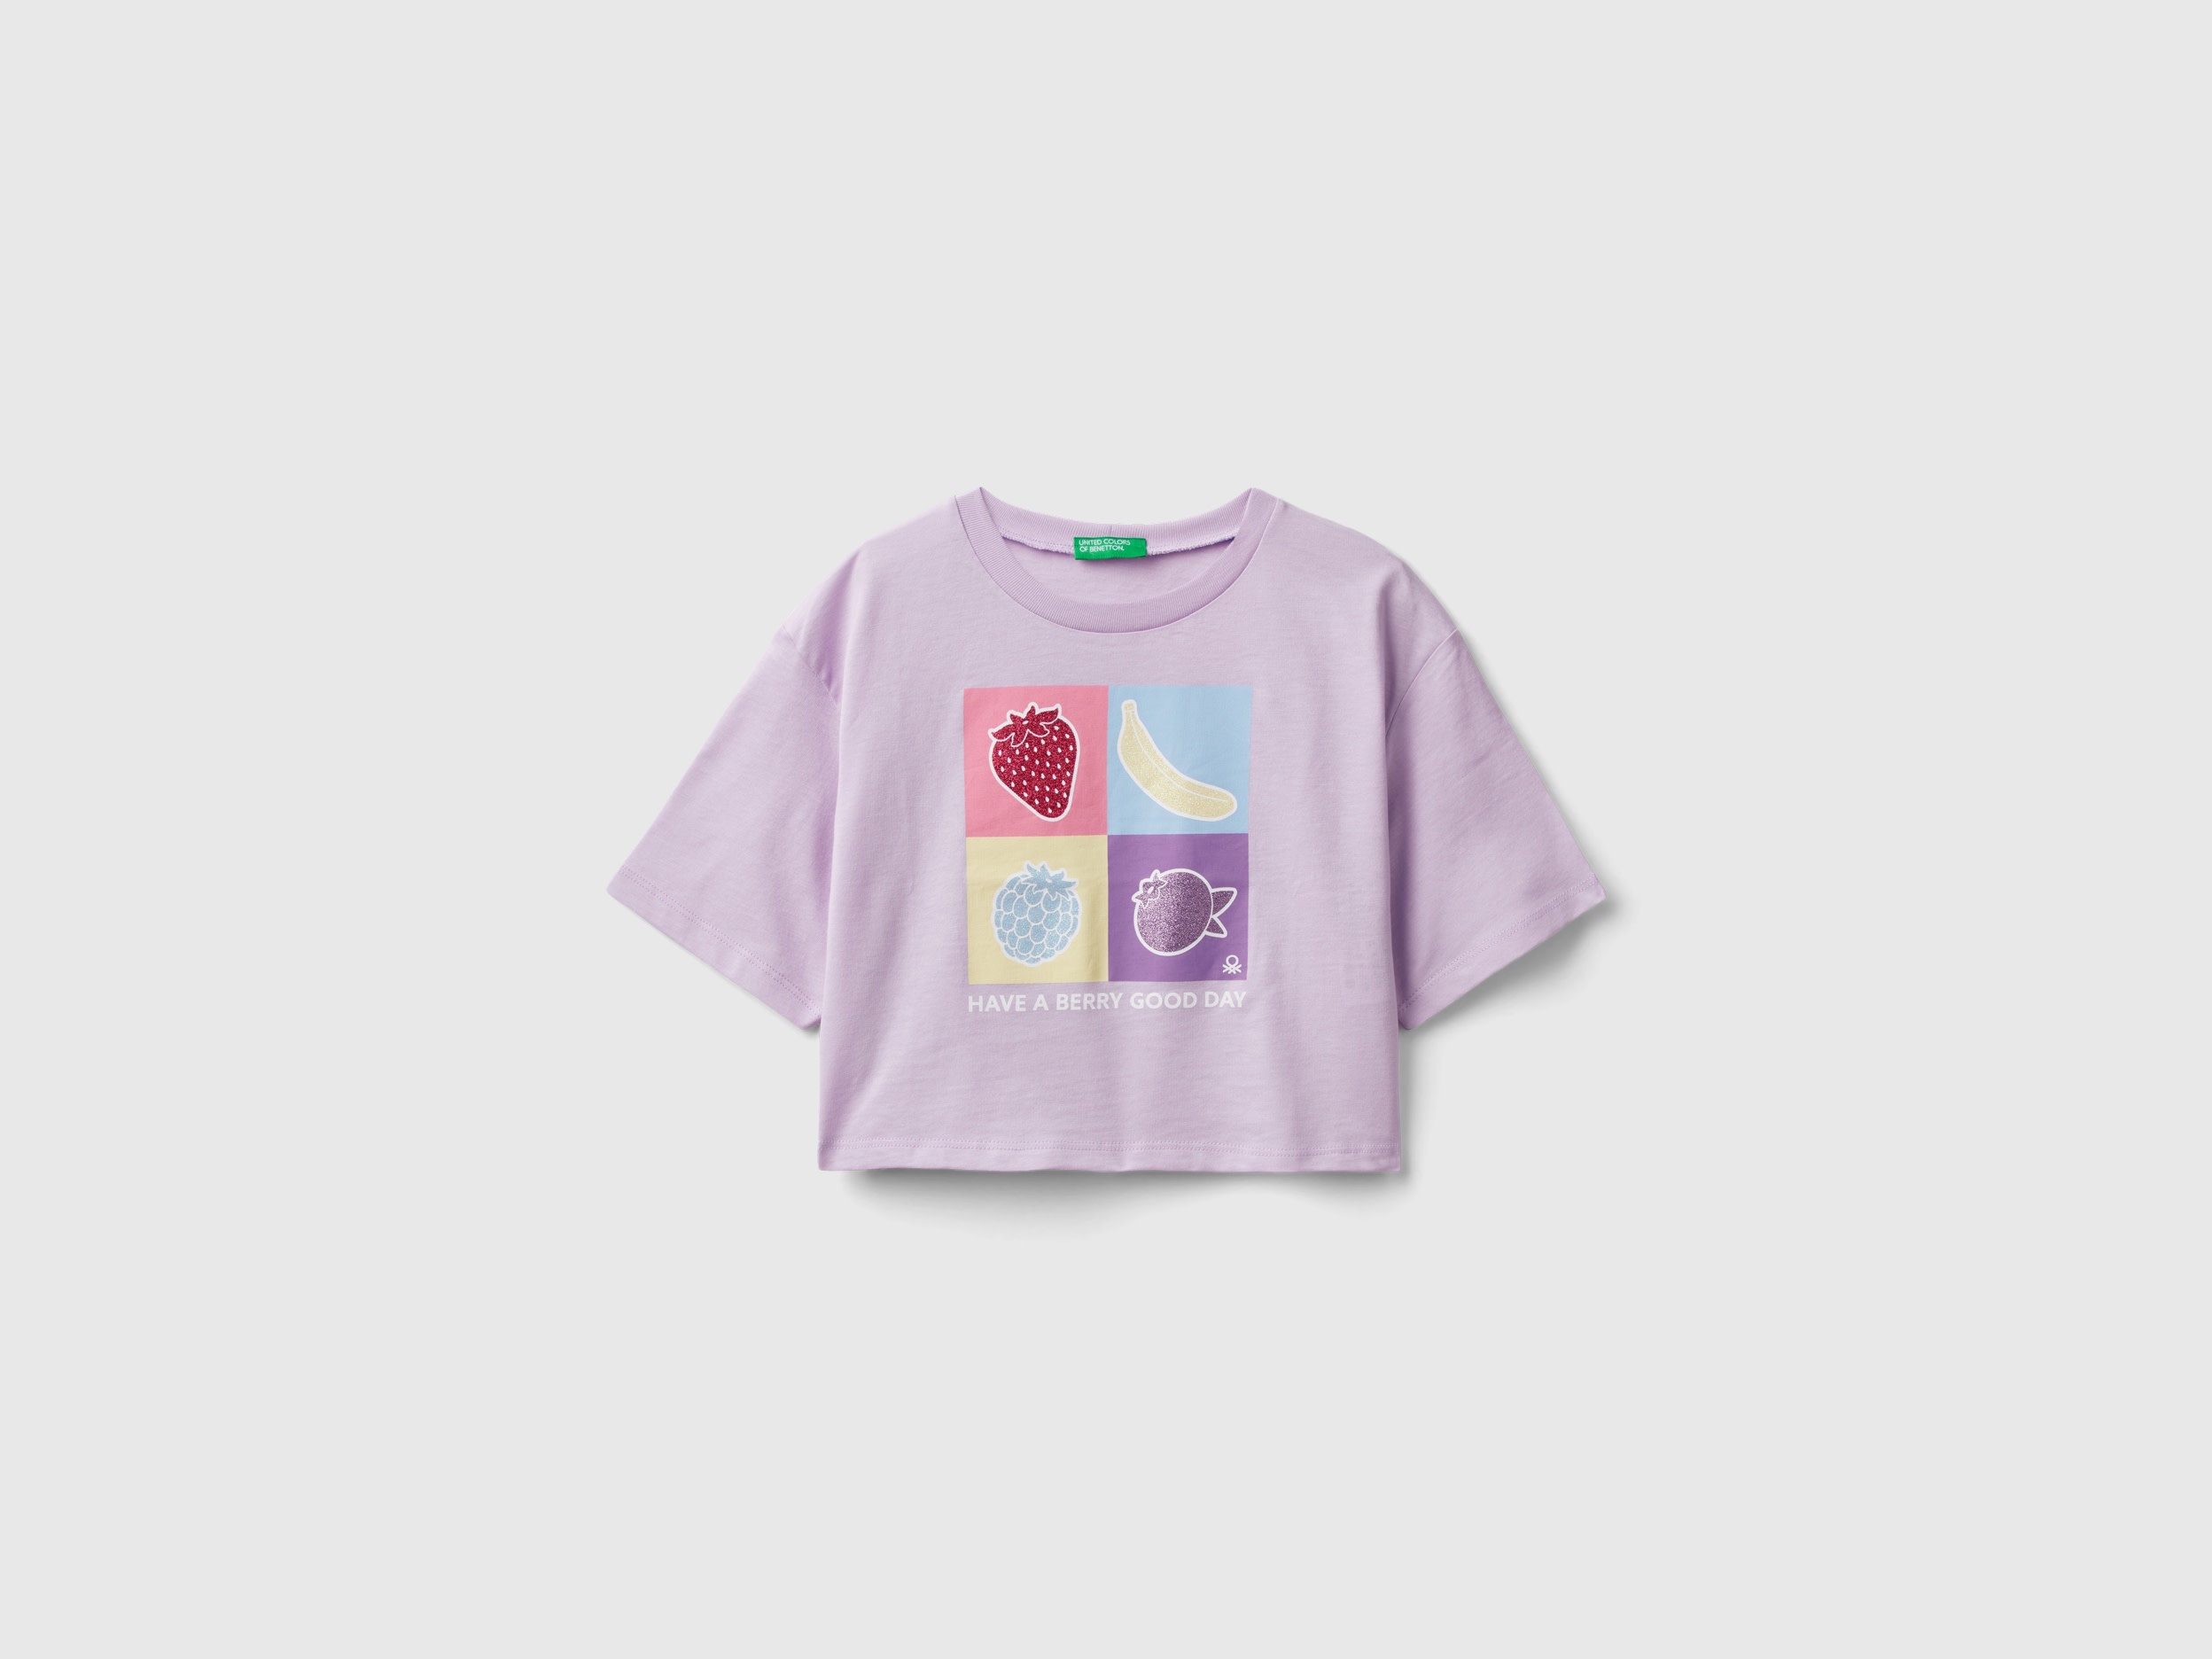 Image of Benetton, T-shirt With Glittery Print, size XL, Lilac, Kids